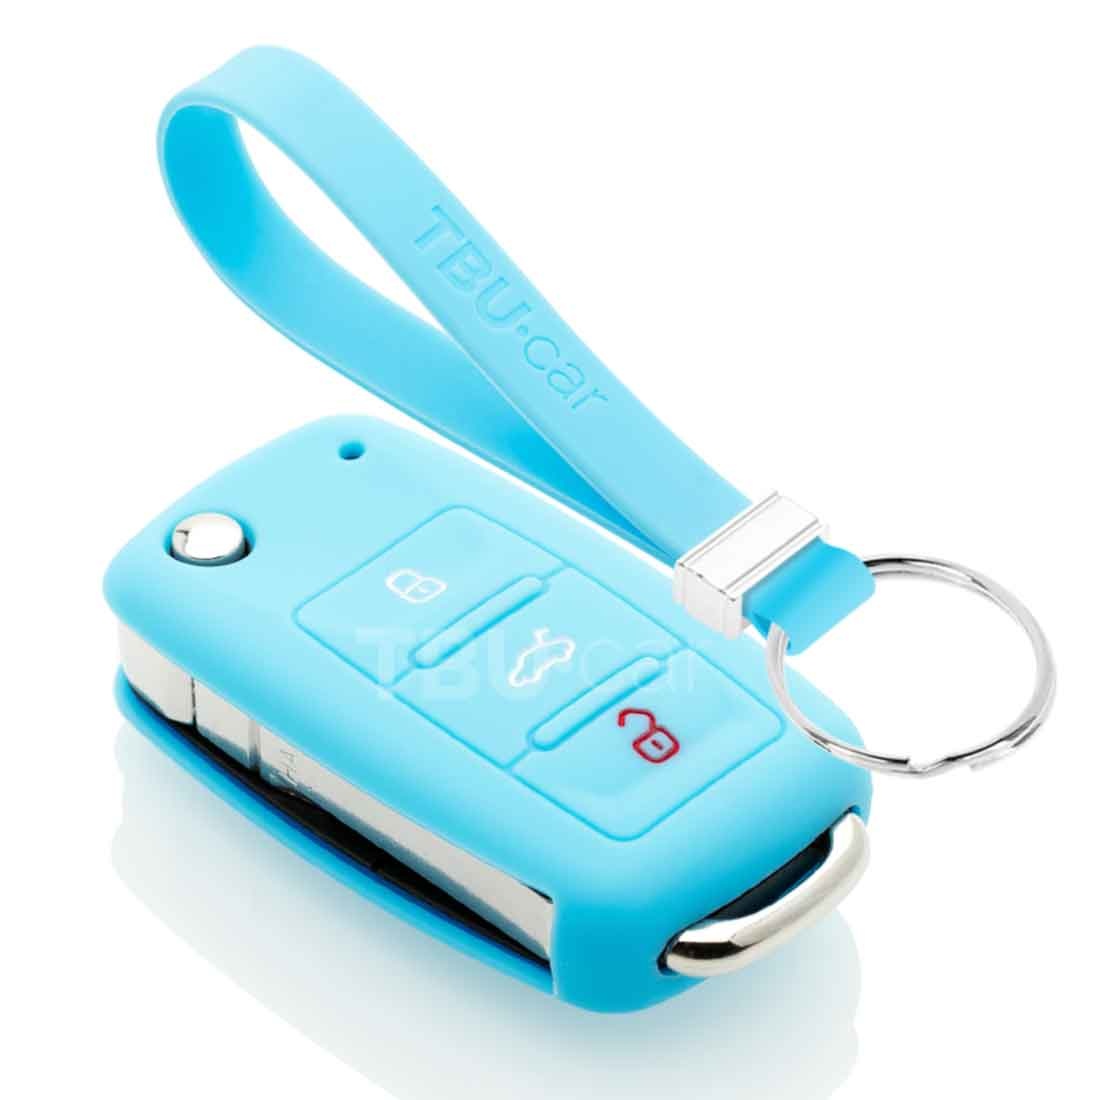 TBU car TBU car Car key cover compatible with VW - Silicone Protective Remote Key Shell - FOB Case Cover - Light Blue